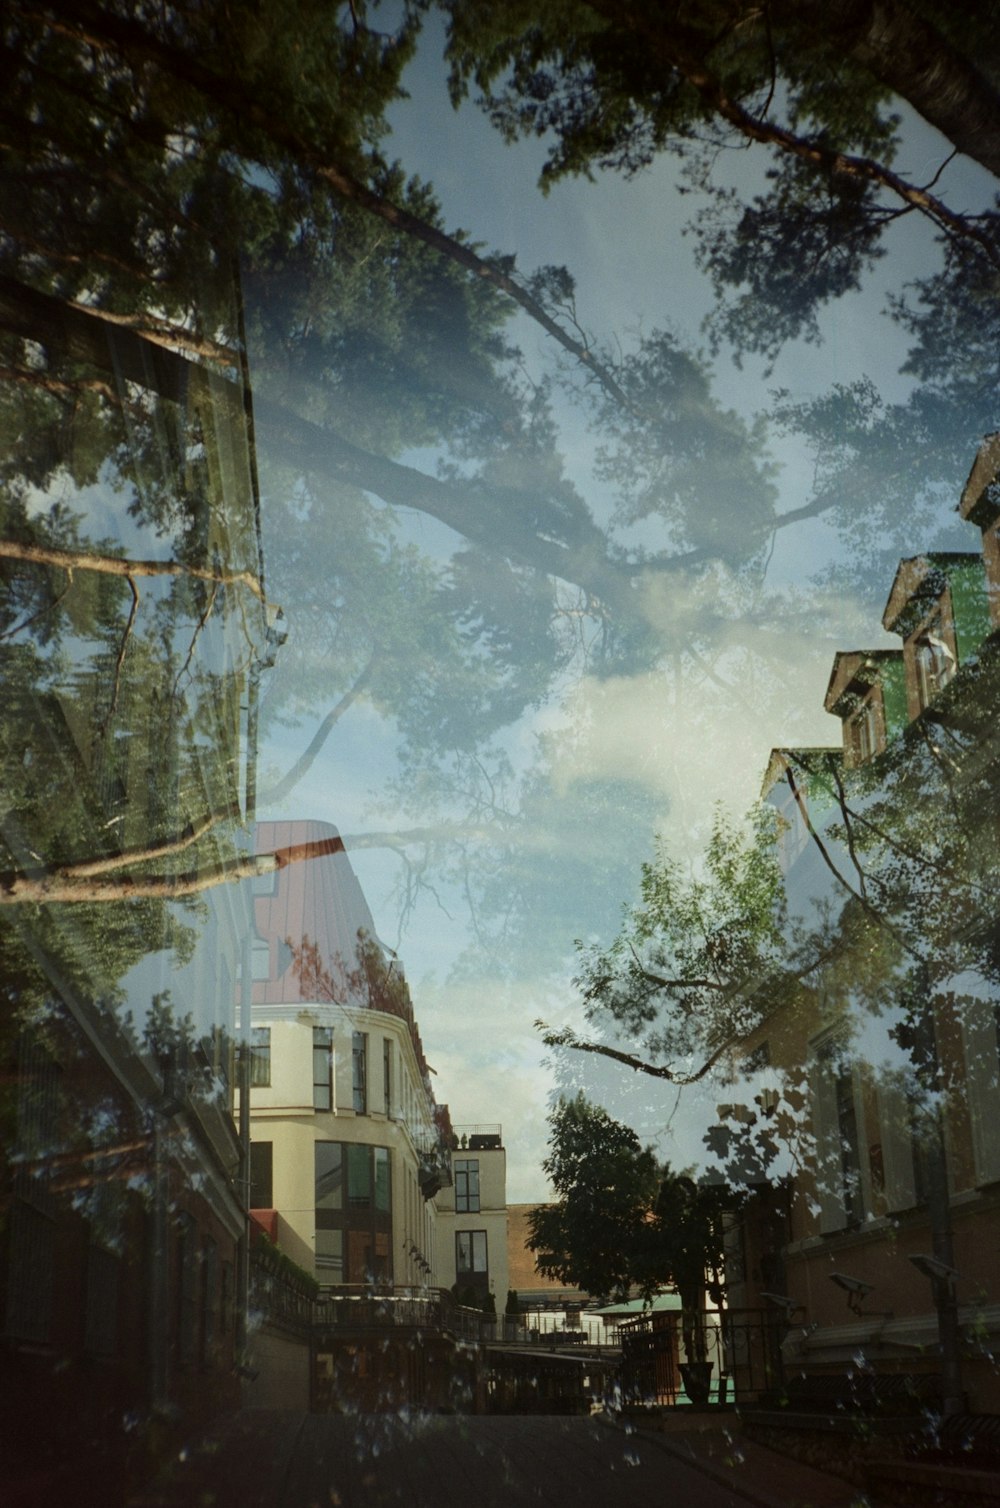 a reflection of a building and trees in a window